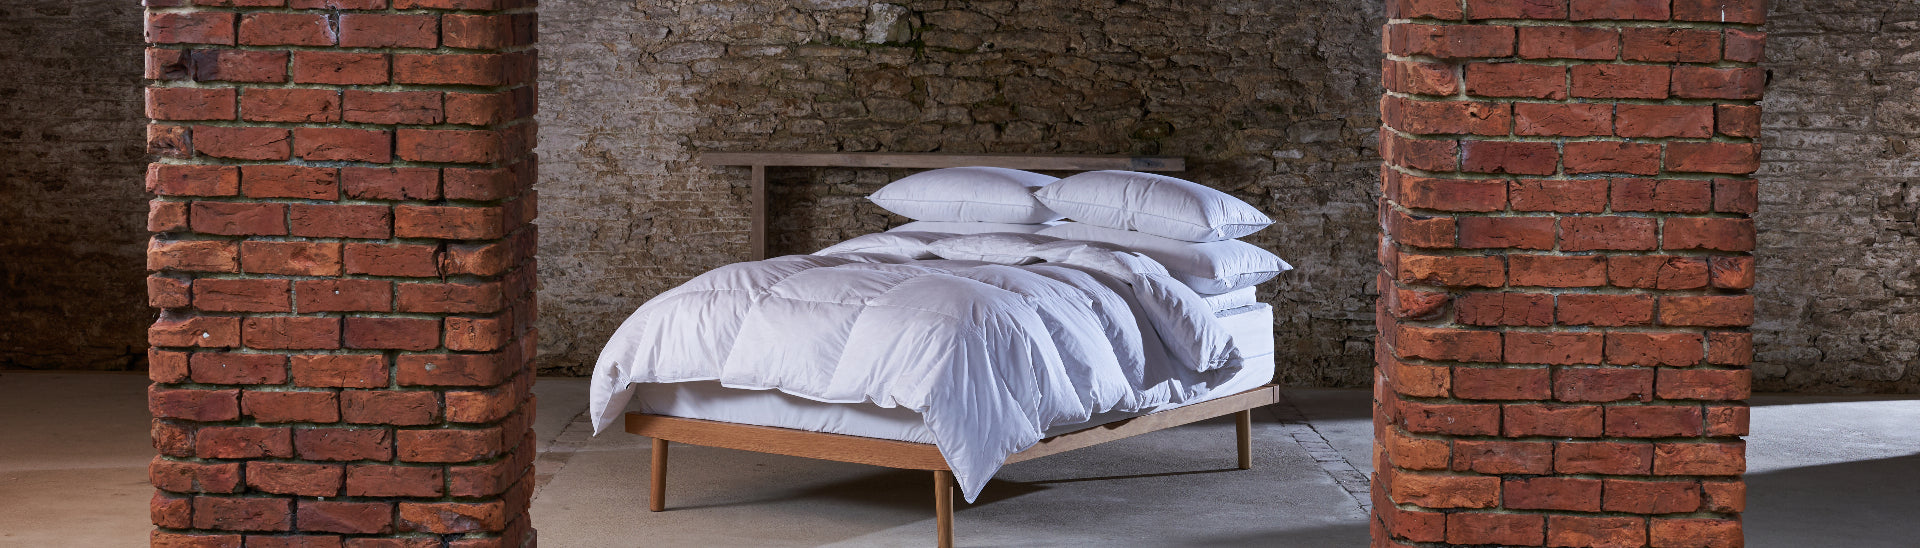 Duck Feather & Down Bedding | Duck Feather & Down Duvets, Pillows & Toppers by Linen Cupboard Yorkshire